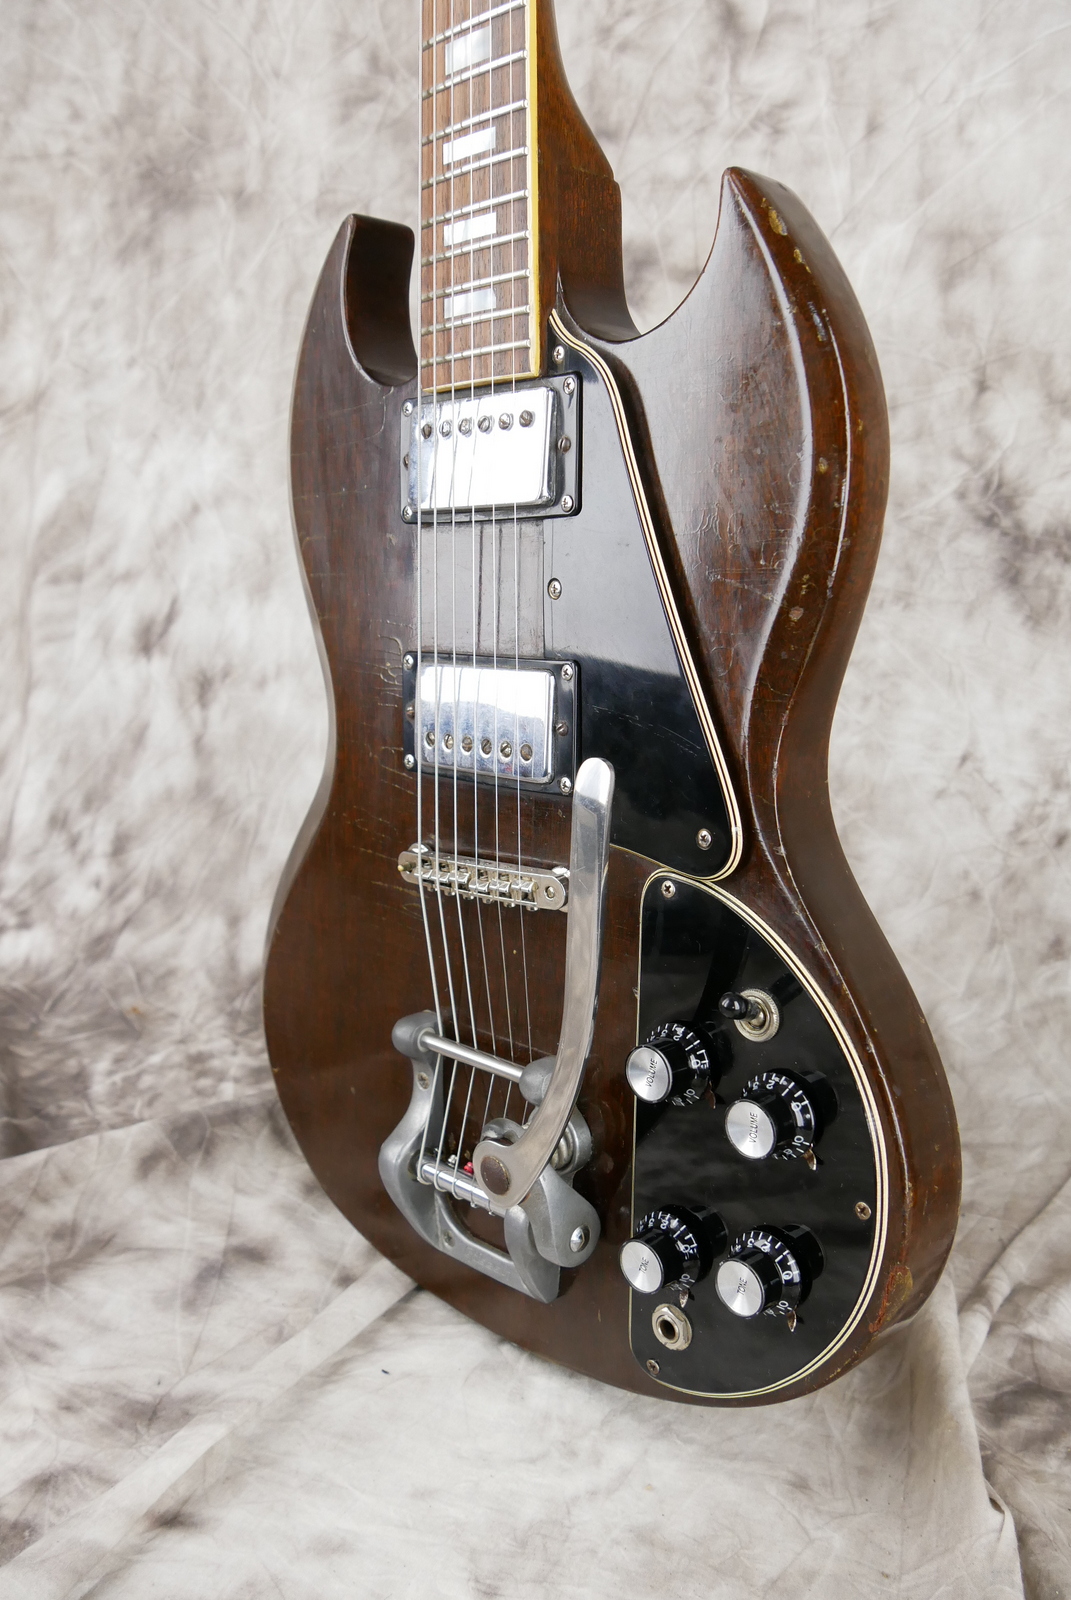 Gibson_SG_Deluxe_bigsby_1971_1972_walnut_cts-pots_1966-010.JPG